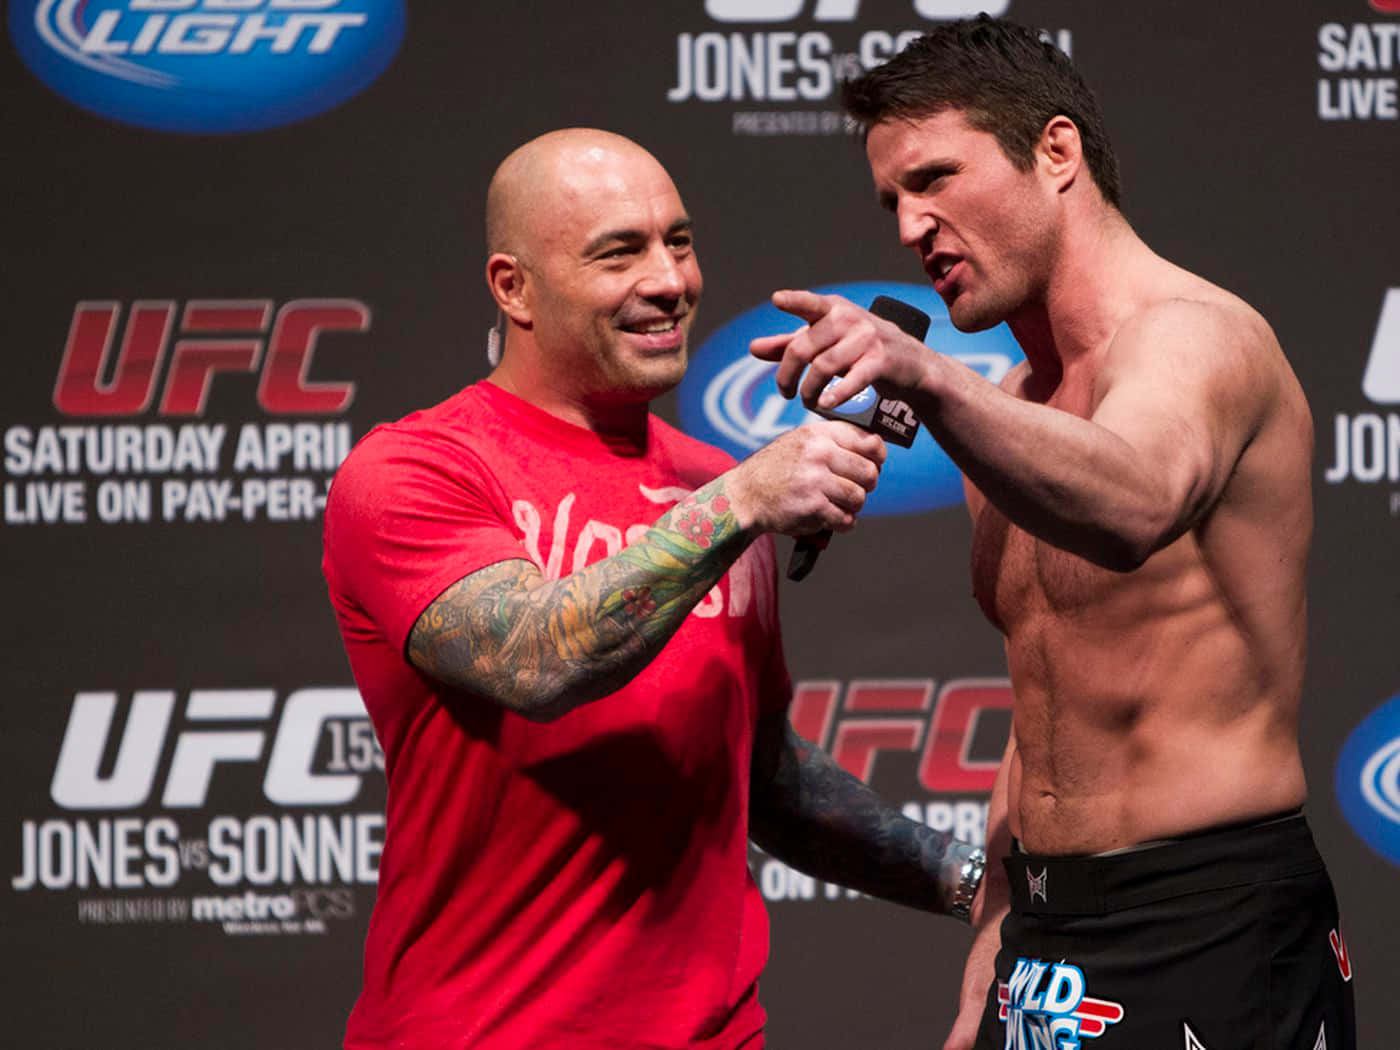 Chaelsonnen Fight Presscon Would Translate To 